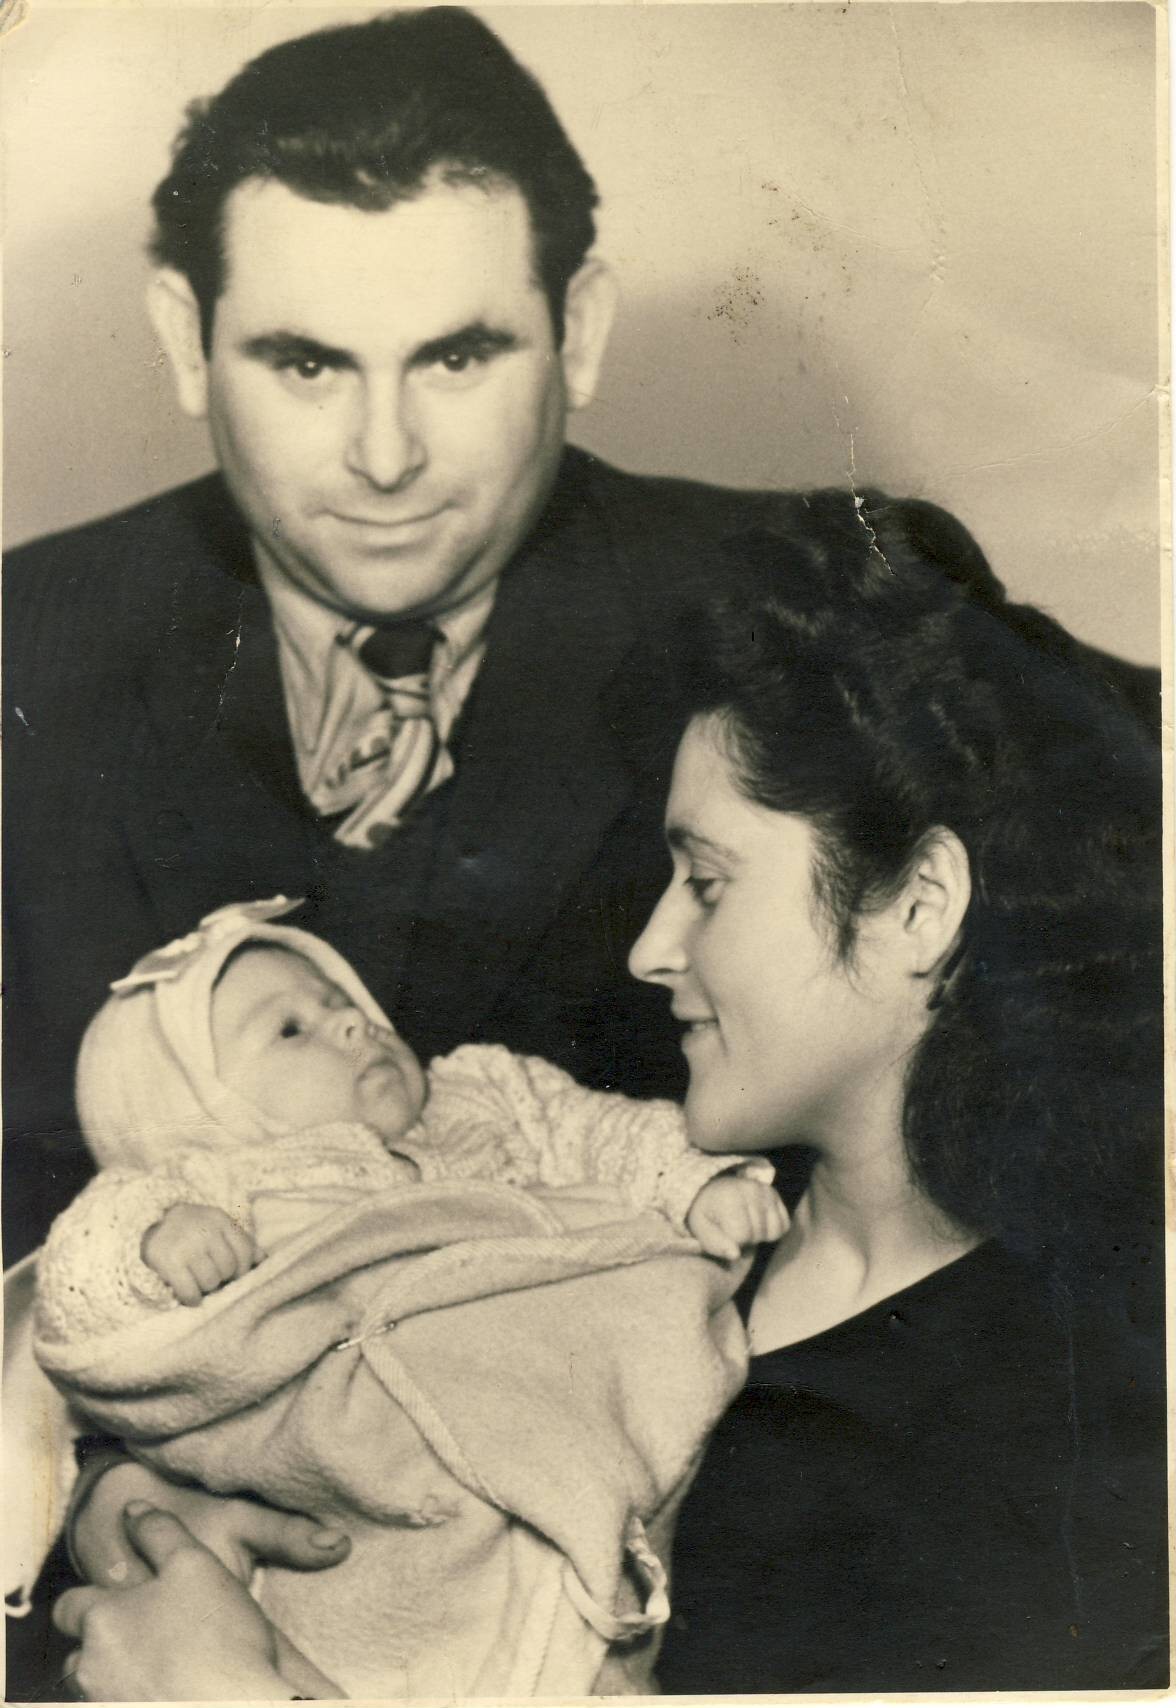 Murry & Toby Cymber with Daughter Ruth 1949